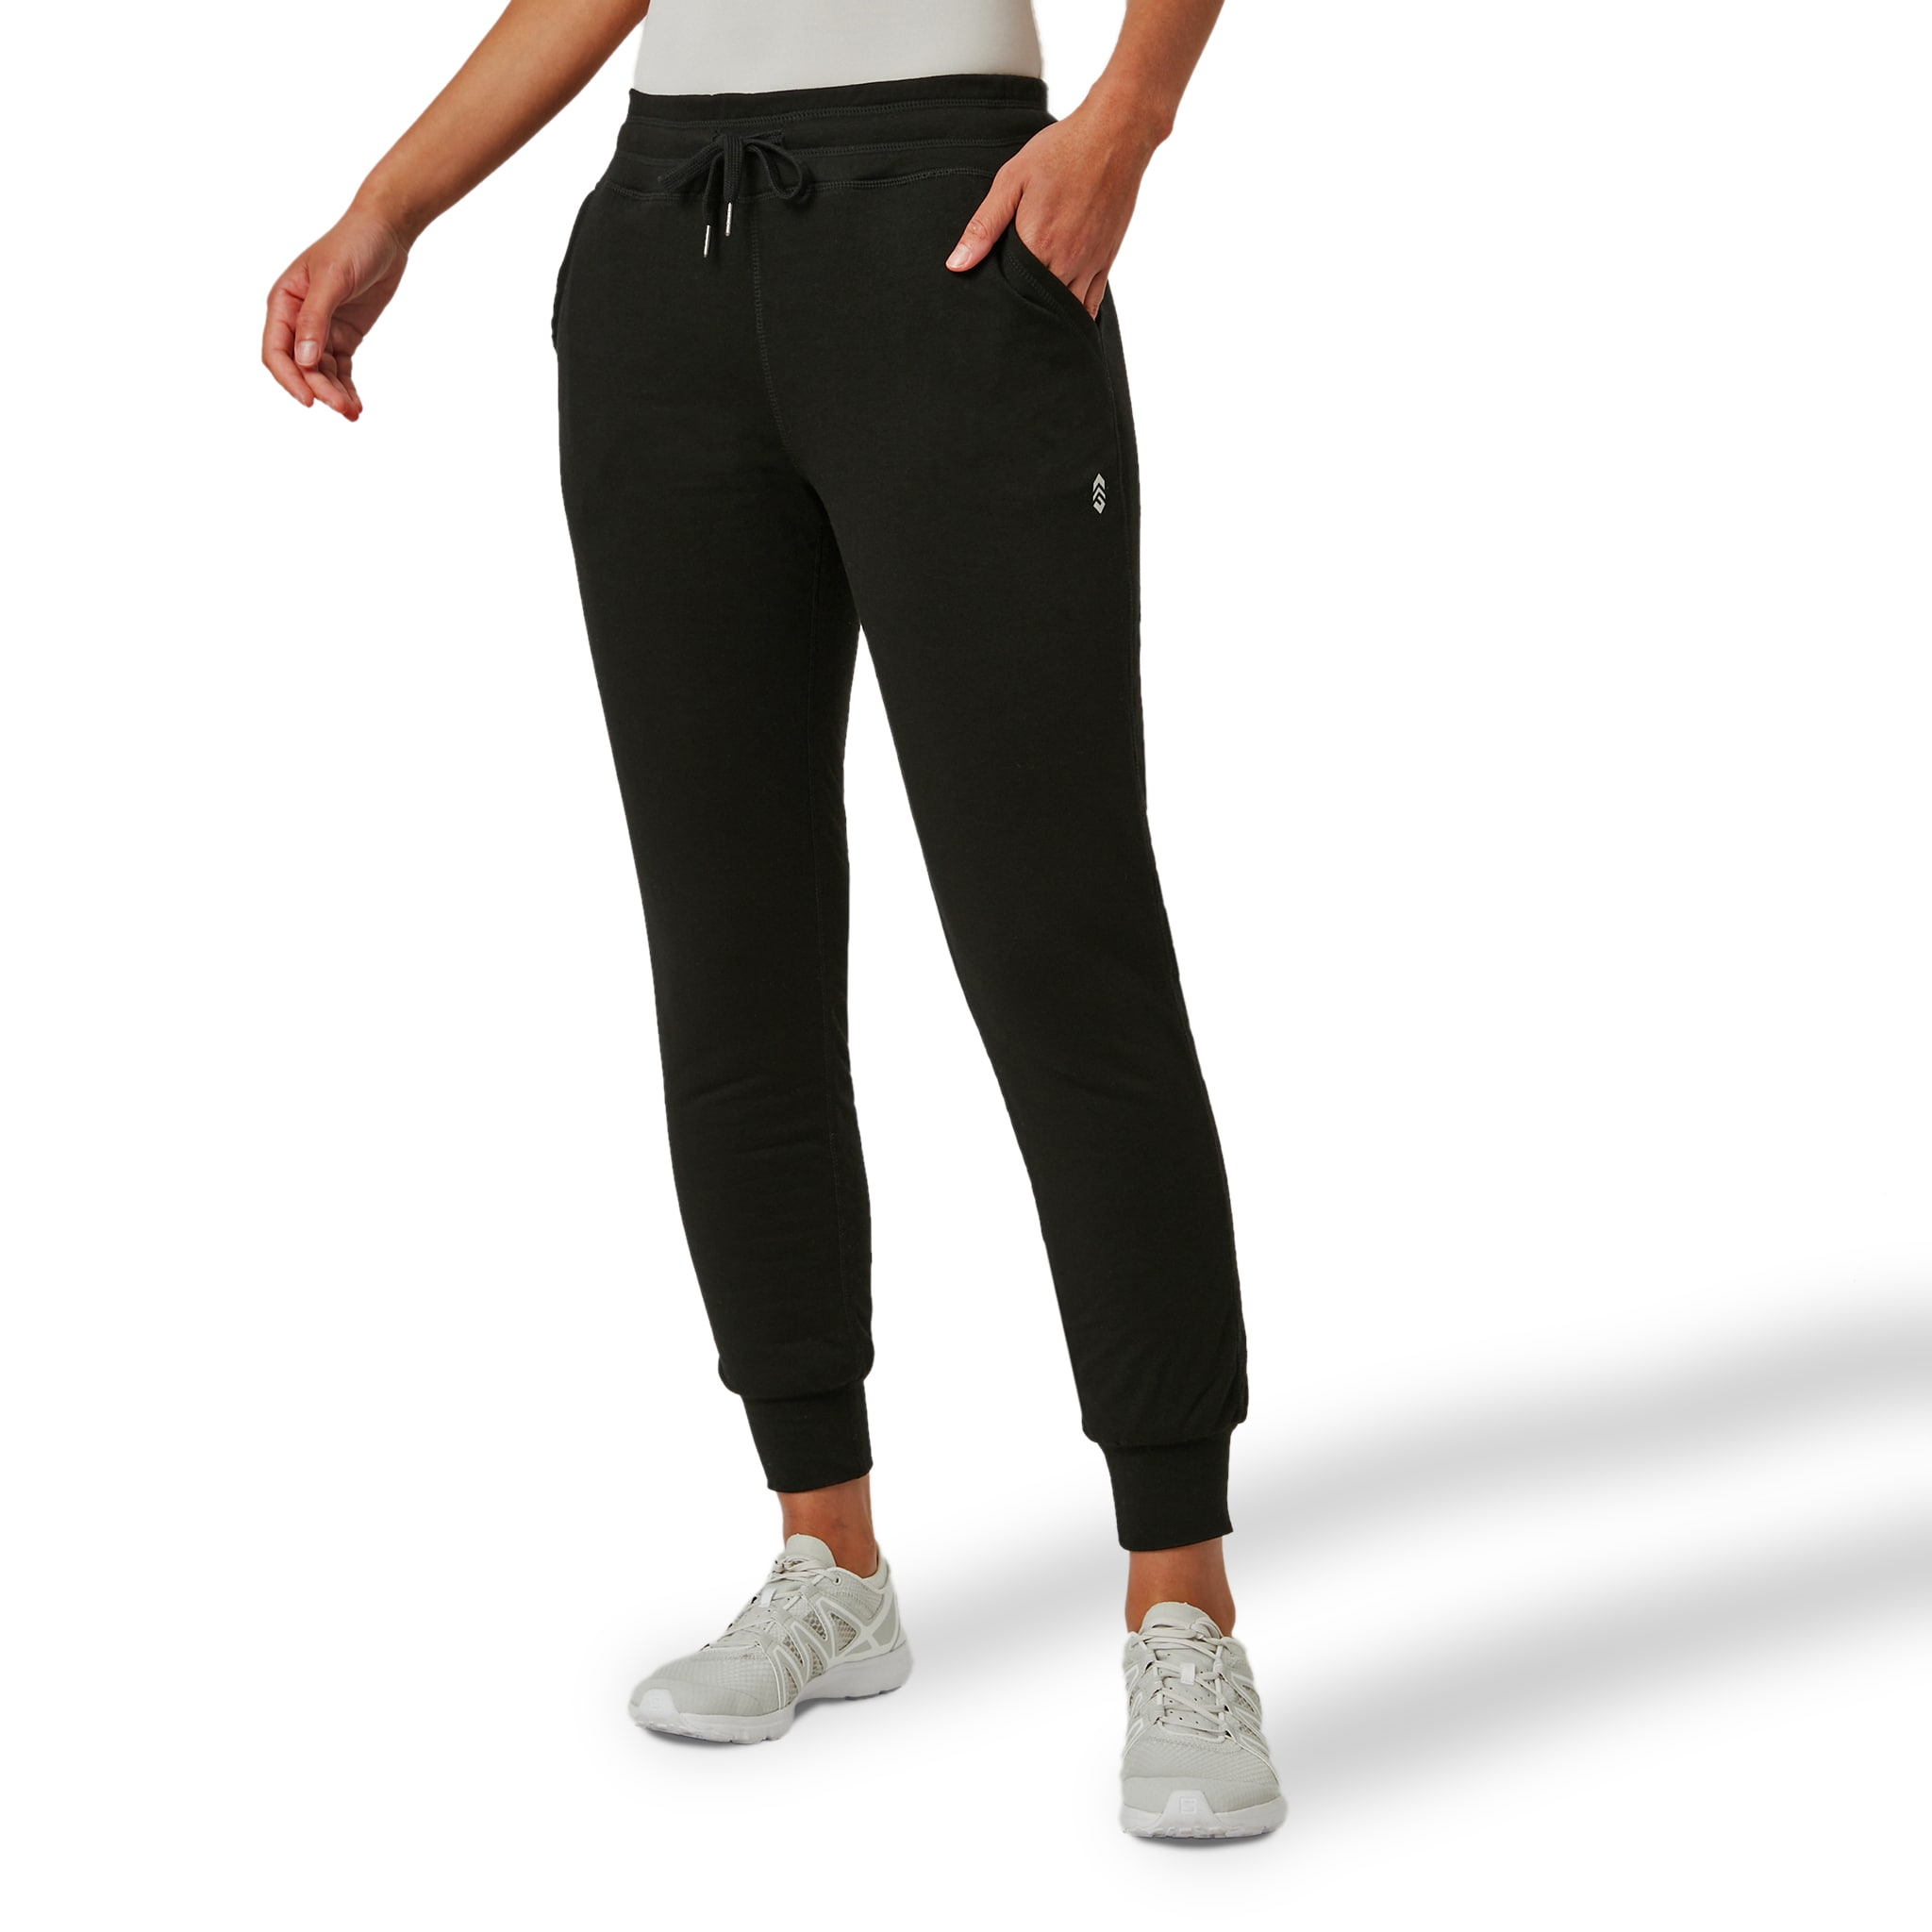 Free Country Women's Luxe Jogger Pants - Black L, Large Size